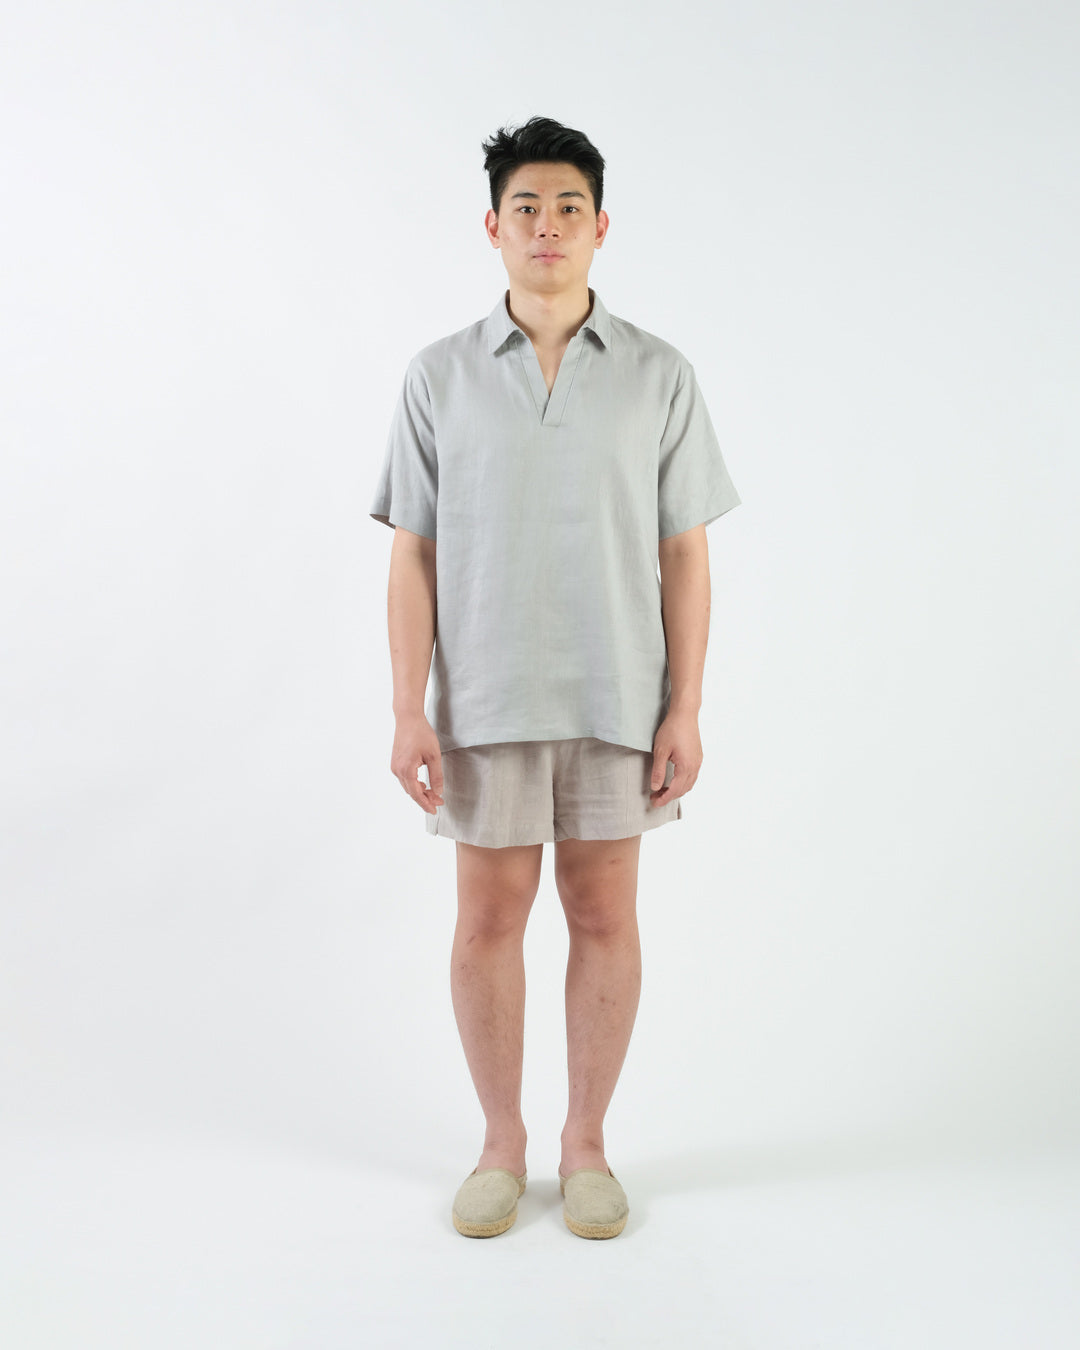 BUTTONLESS POLO in light grey